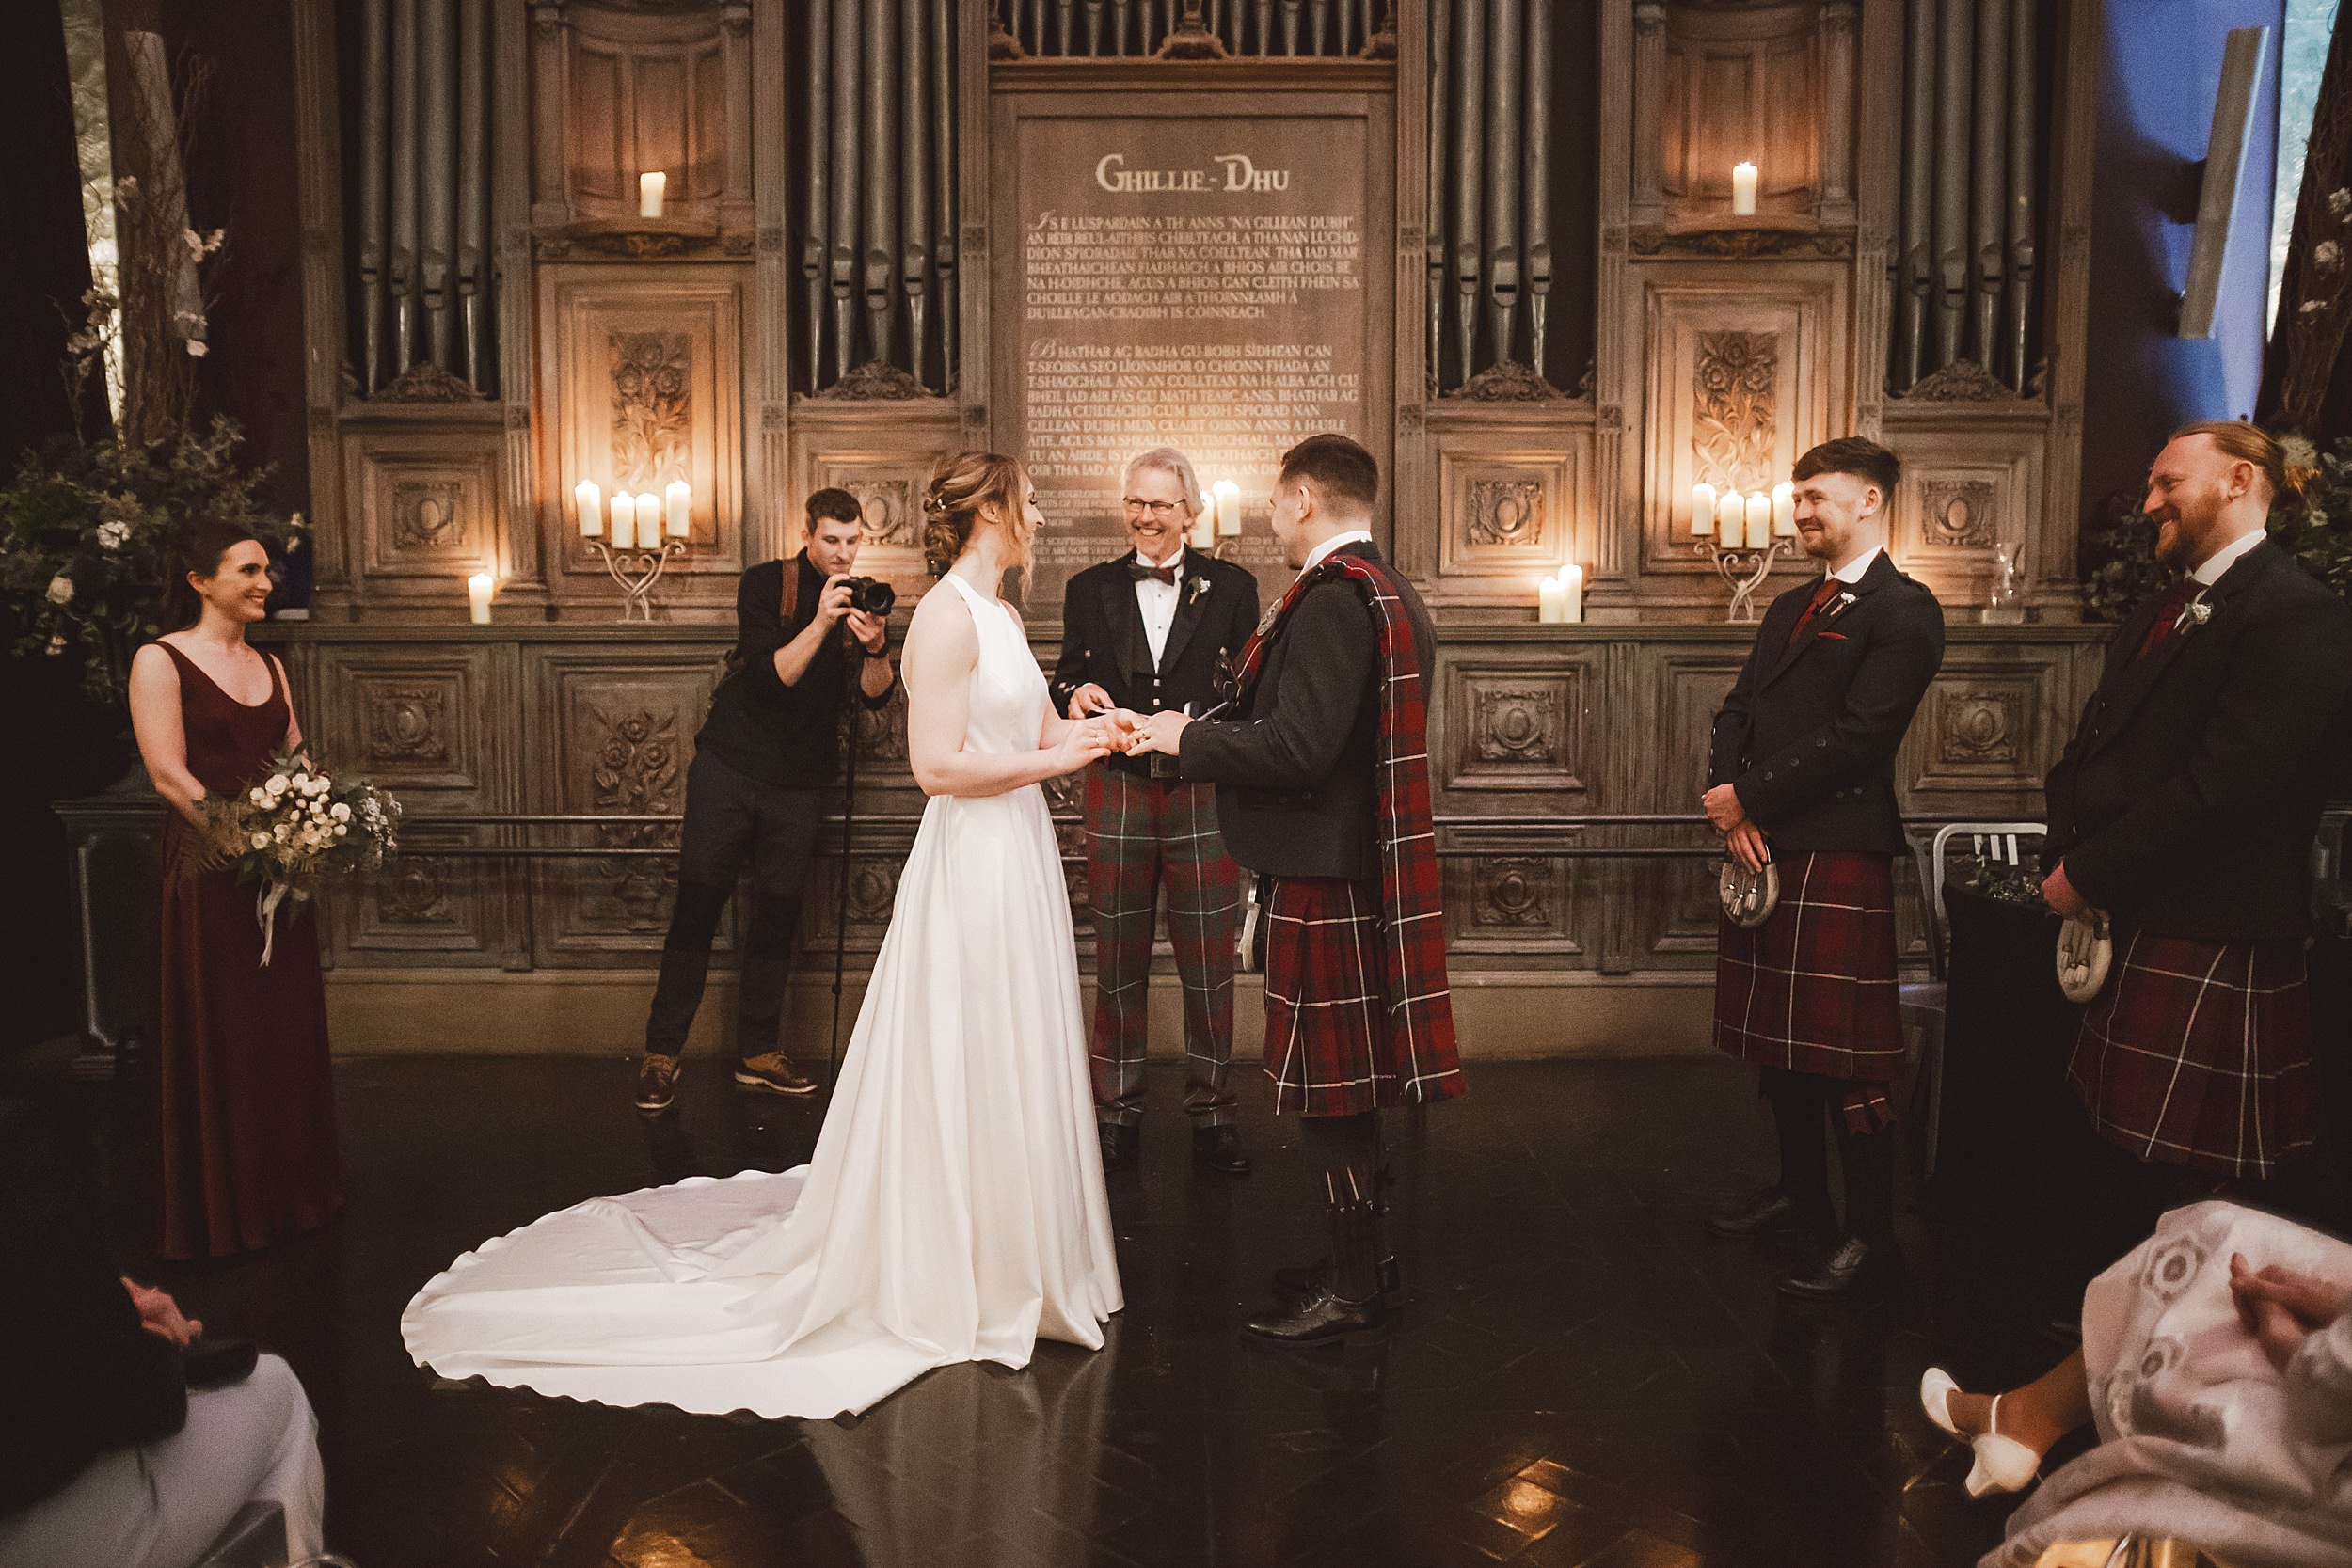 the bride and groom exchange rings as celebrant looks on during their wedding ceremony at unique wedding venue the ghillie dhu in scotland shot by documentary wedding photographer edinburgh